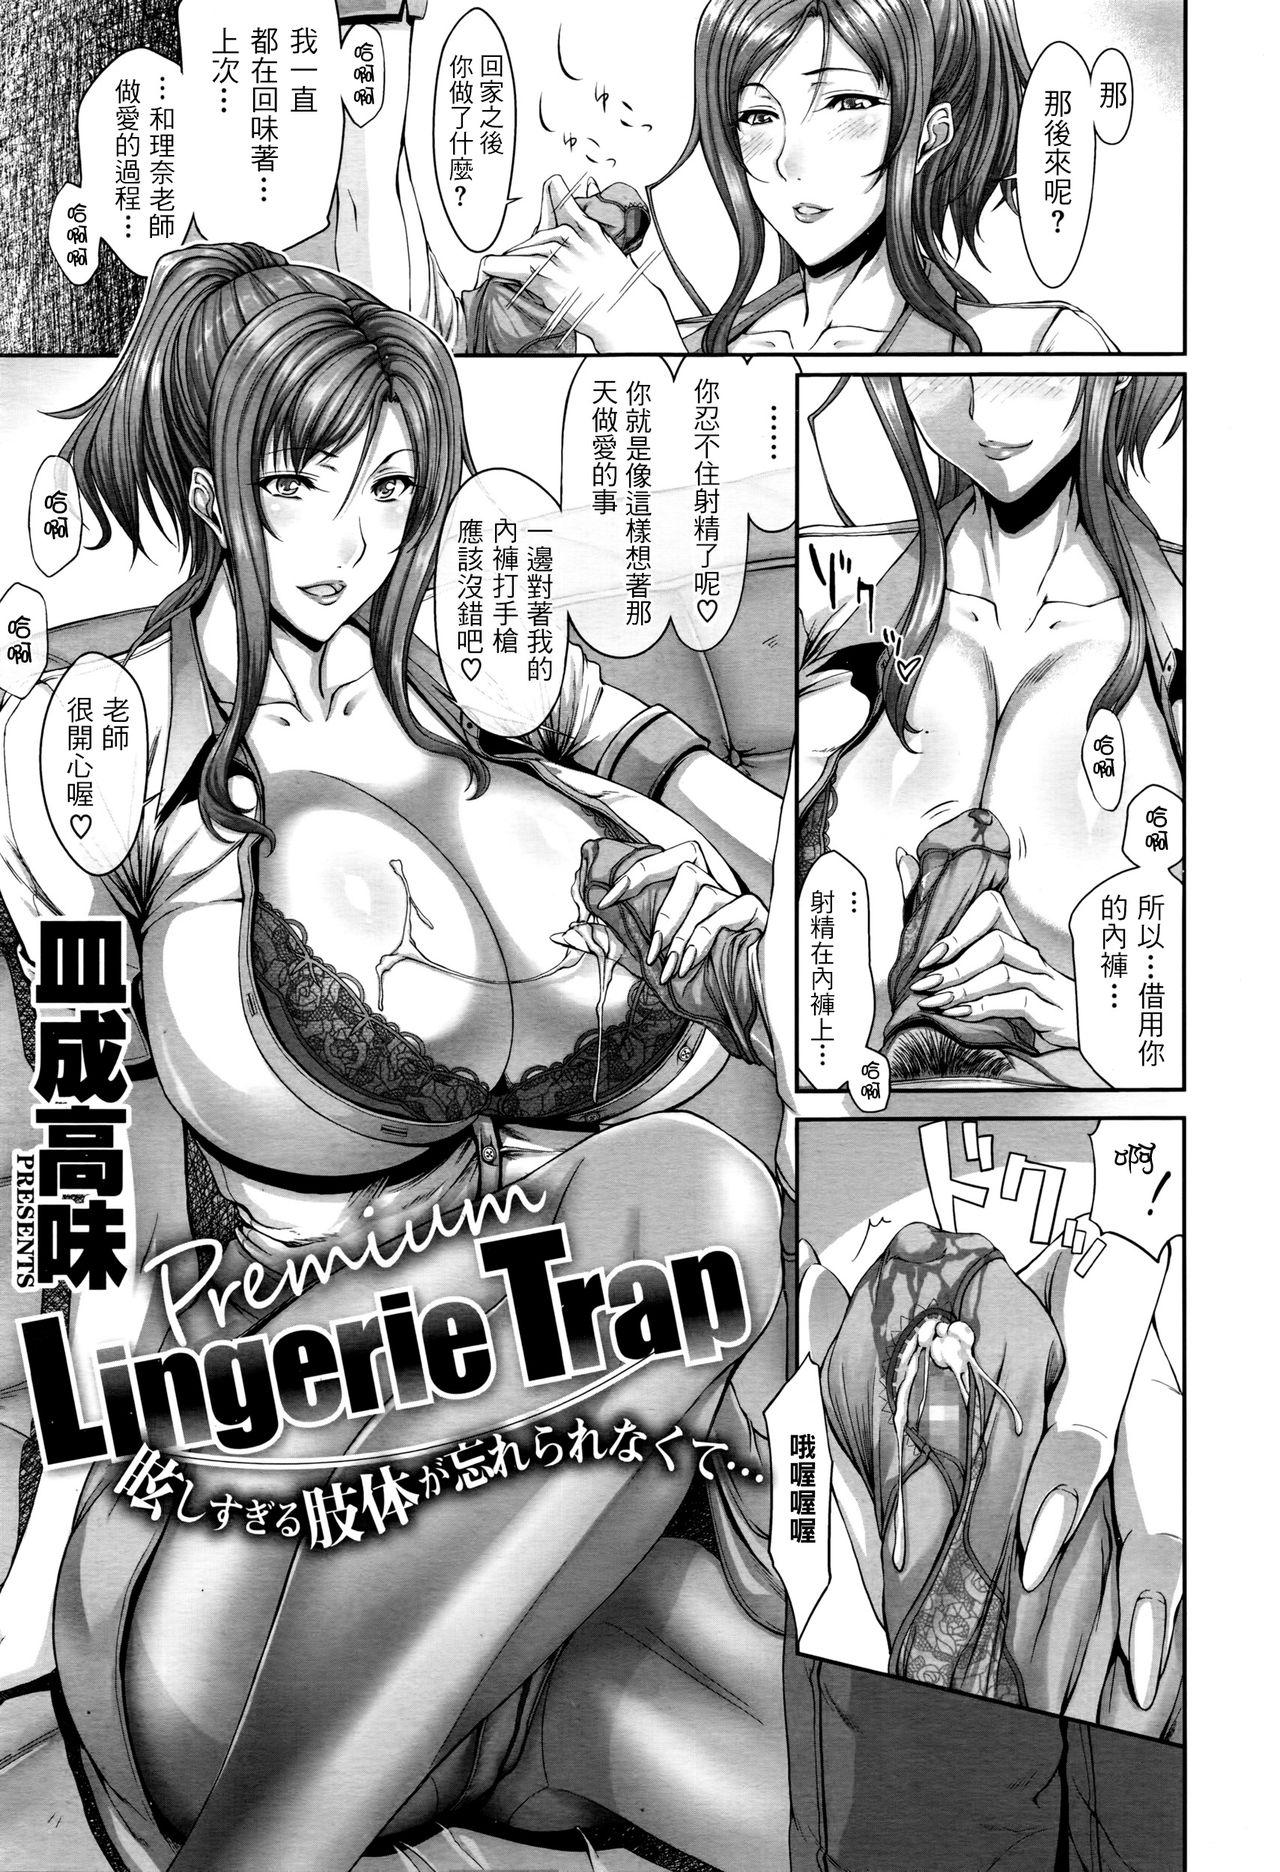 Scandal Lingerie Trap Candid - Page 1